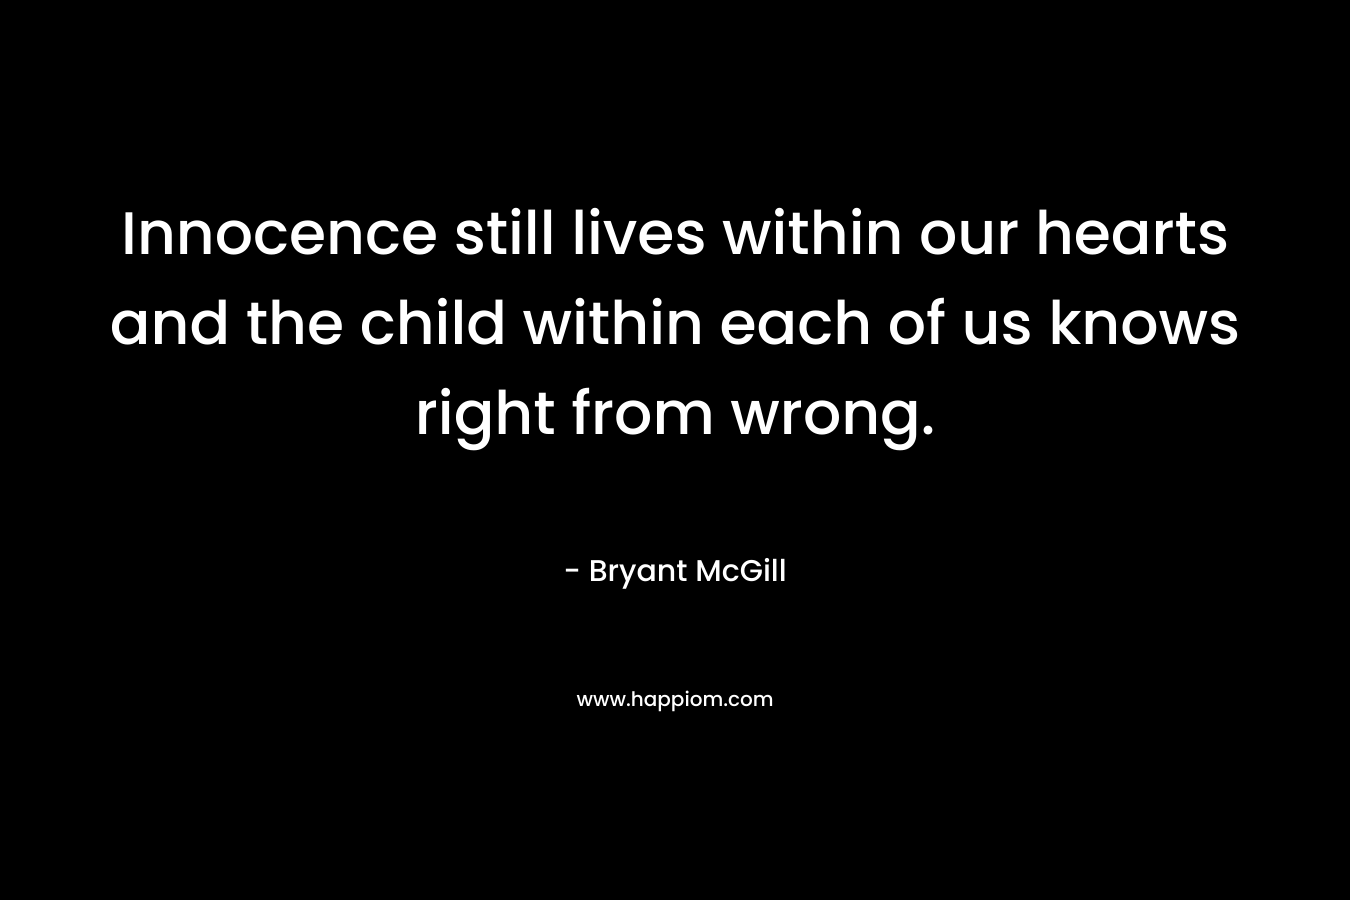 Innocence still lives within our hearts and the child within each of us knows right from wrong.